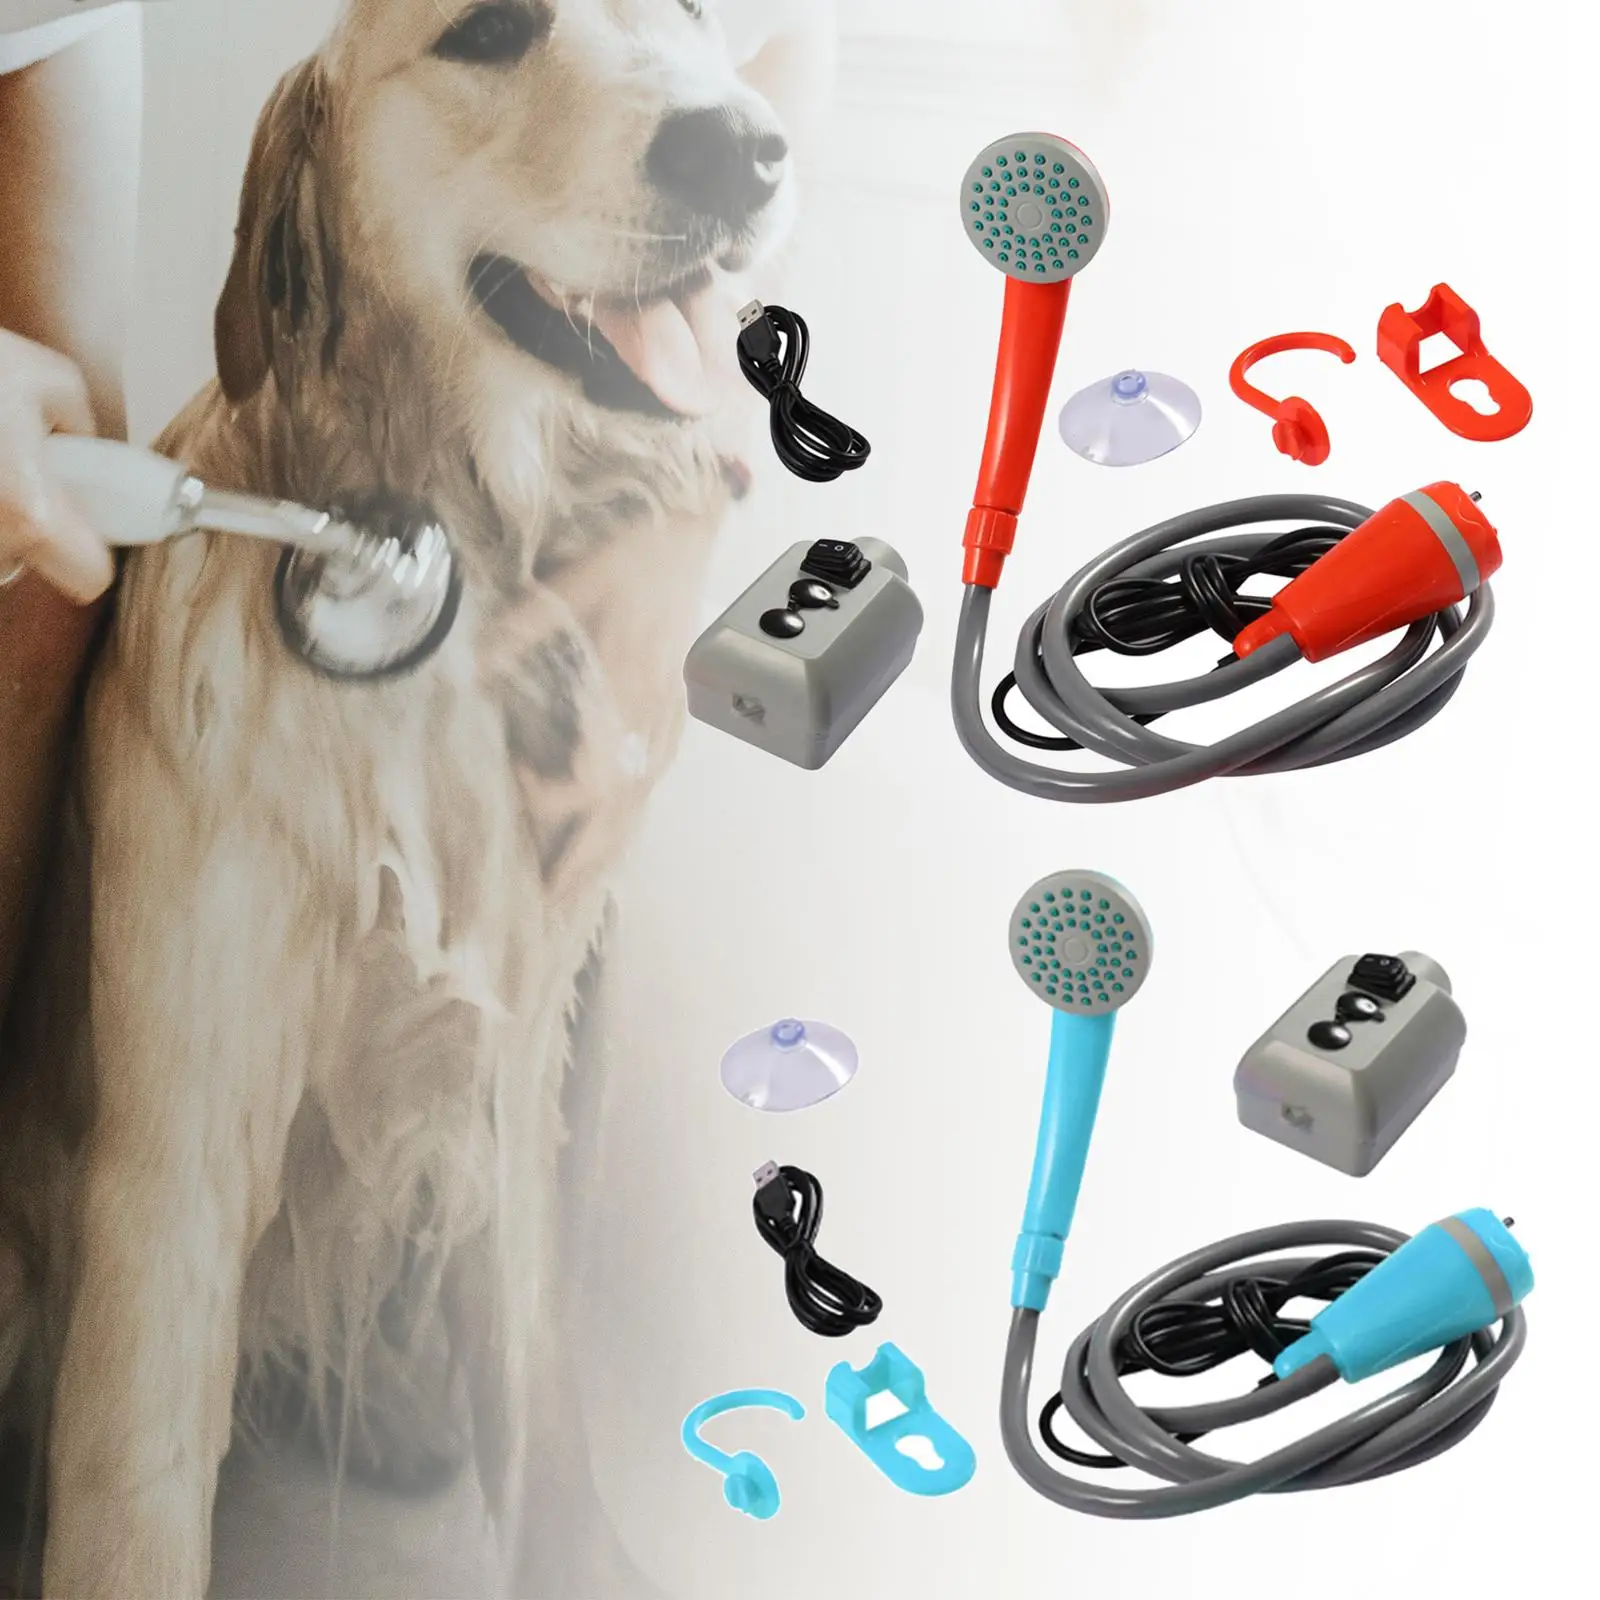 Portable Camping Shower Pump Compact 12V for Dog Cleaning Hiking